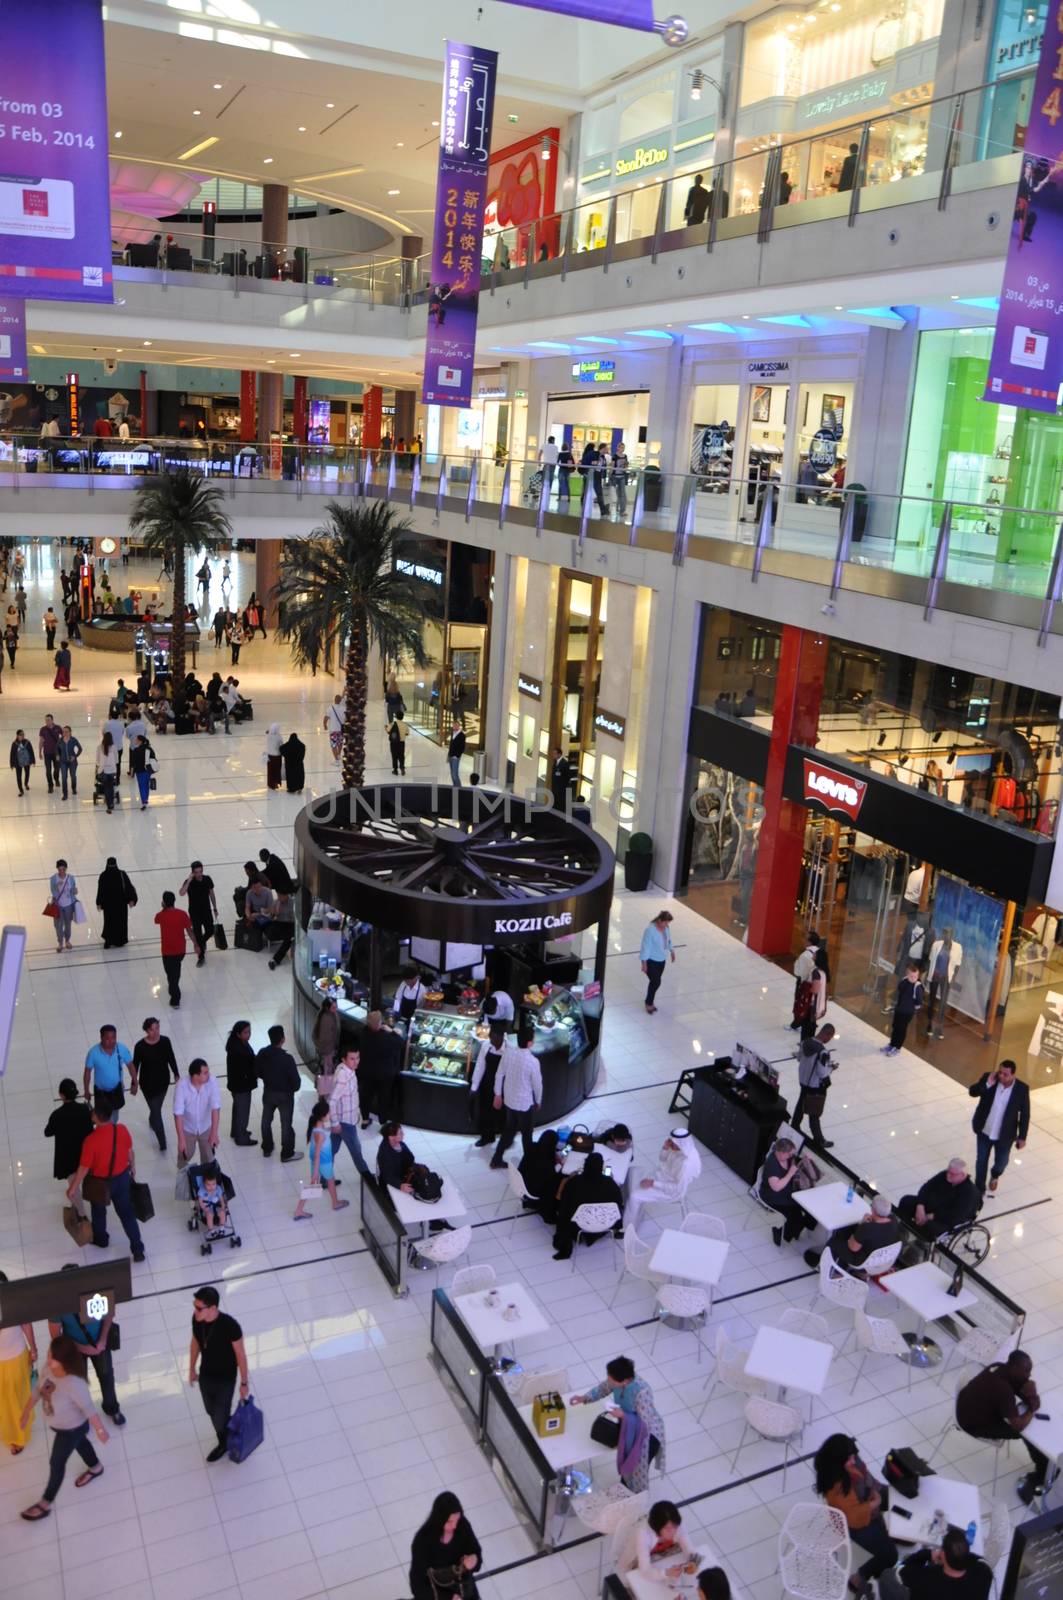 Dubai Mall in Dubai, UAE. At over 12 million sq ft, it is the world's largest shopping mall based on total area and 6th largest by gross leasable area.